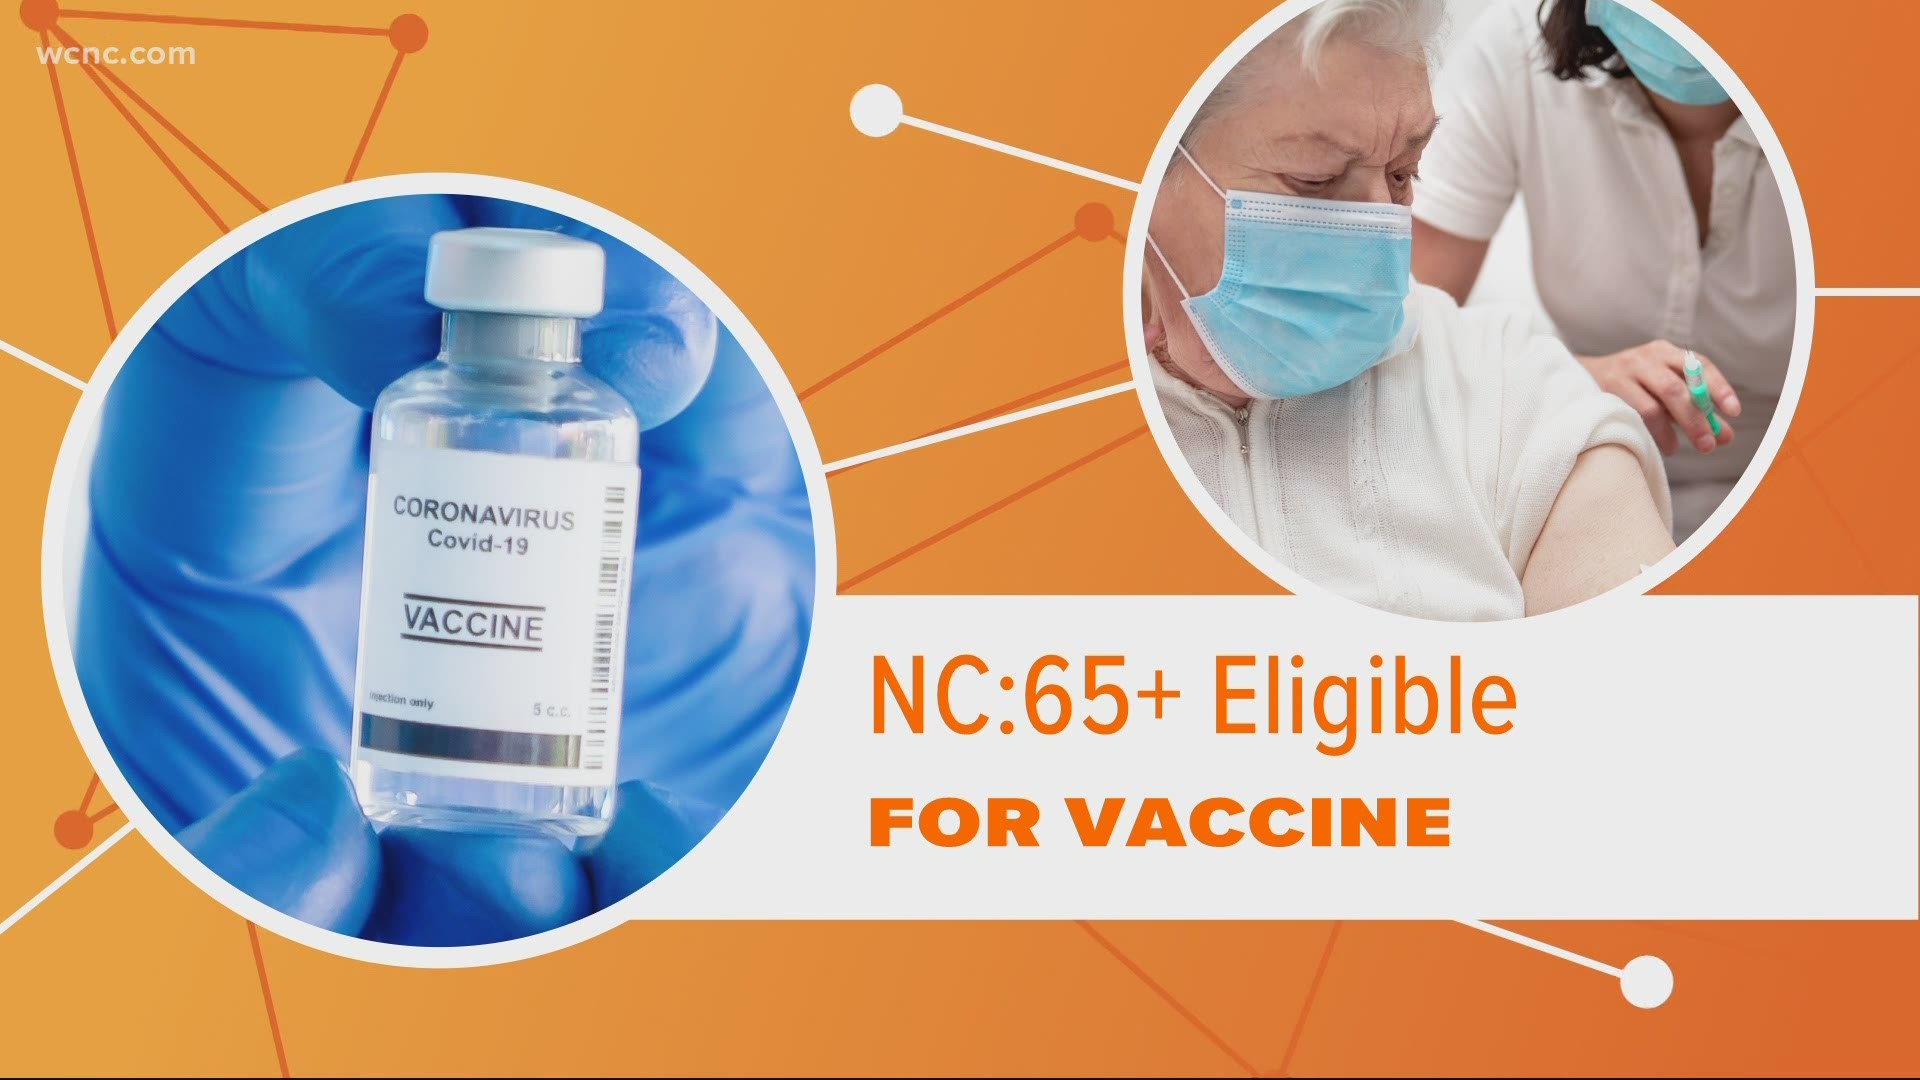 Anyone 65 or over is now eligible for the COVID-19 vaccine in North Carolina, but supplies are still limited so anyone in that age range may still have to wait.